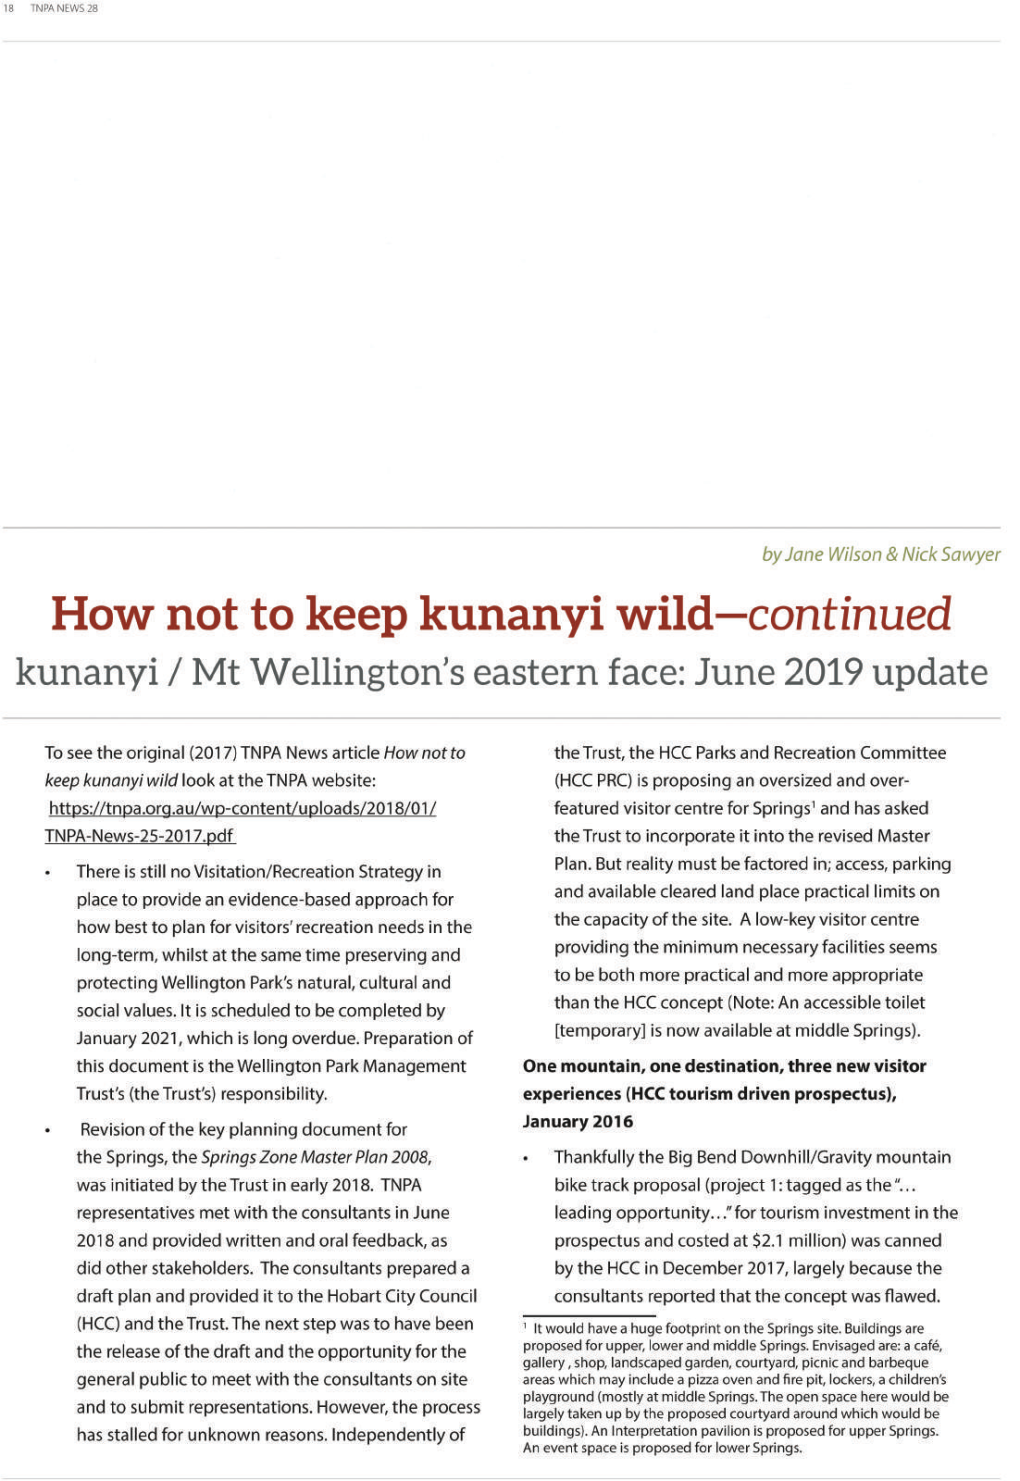 How Not to Keep Kunanyi Wild 2019